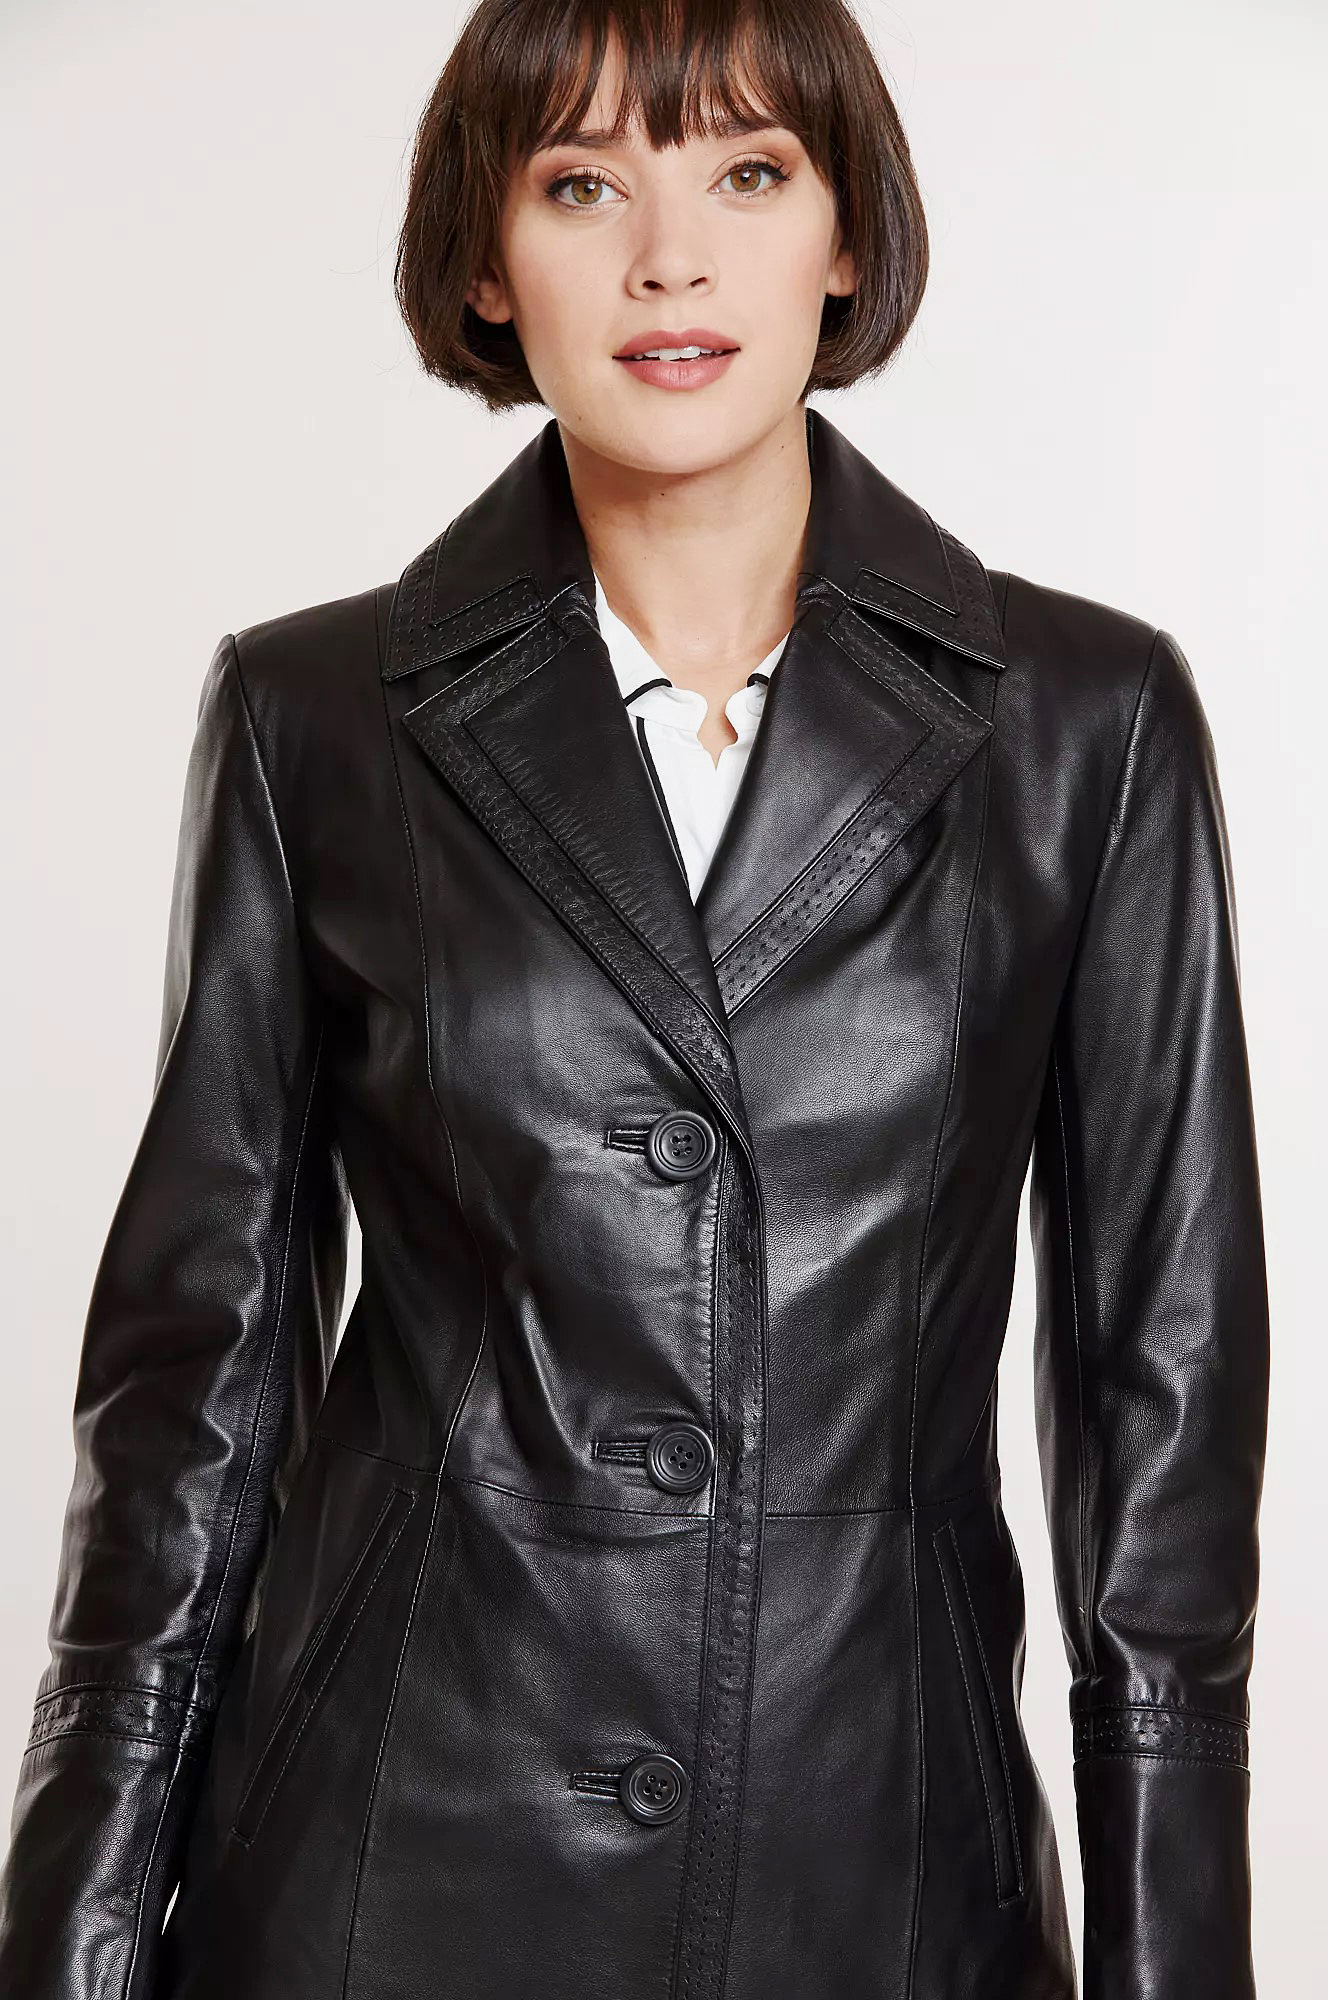 Leather Coat Daydreams: One of the finest leather coats I've seen on ...